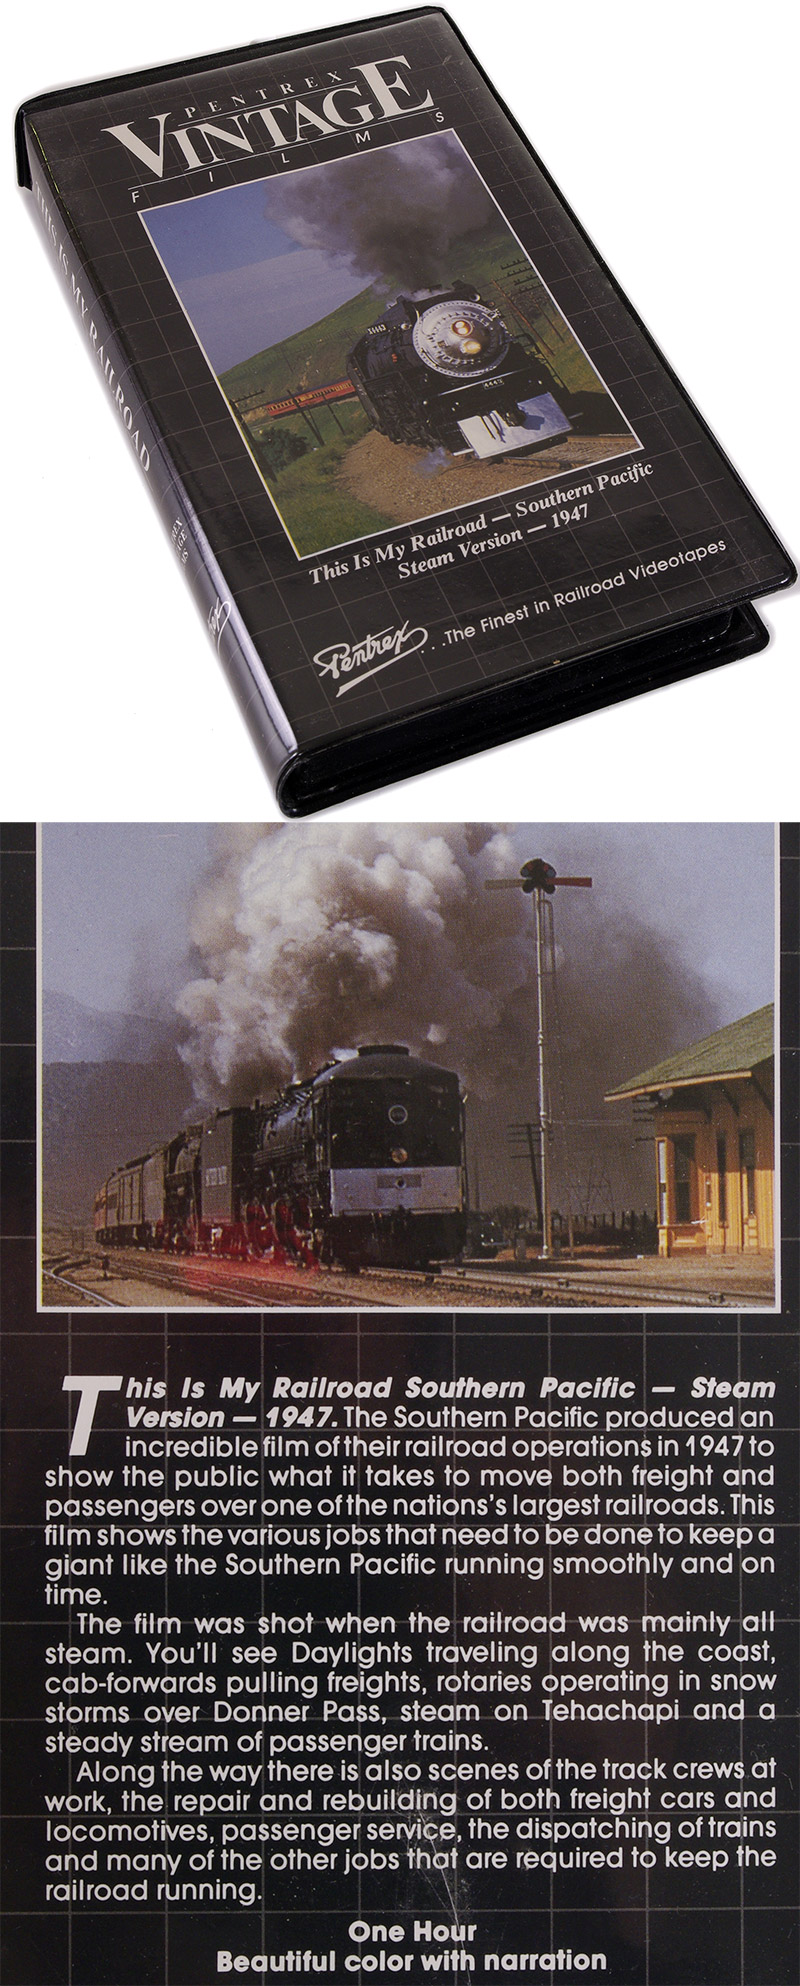  This is My Railroad Southern Pacific - Steam Version - 1947  (VHS)  в продаже